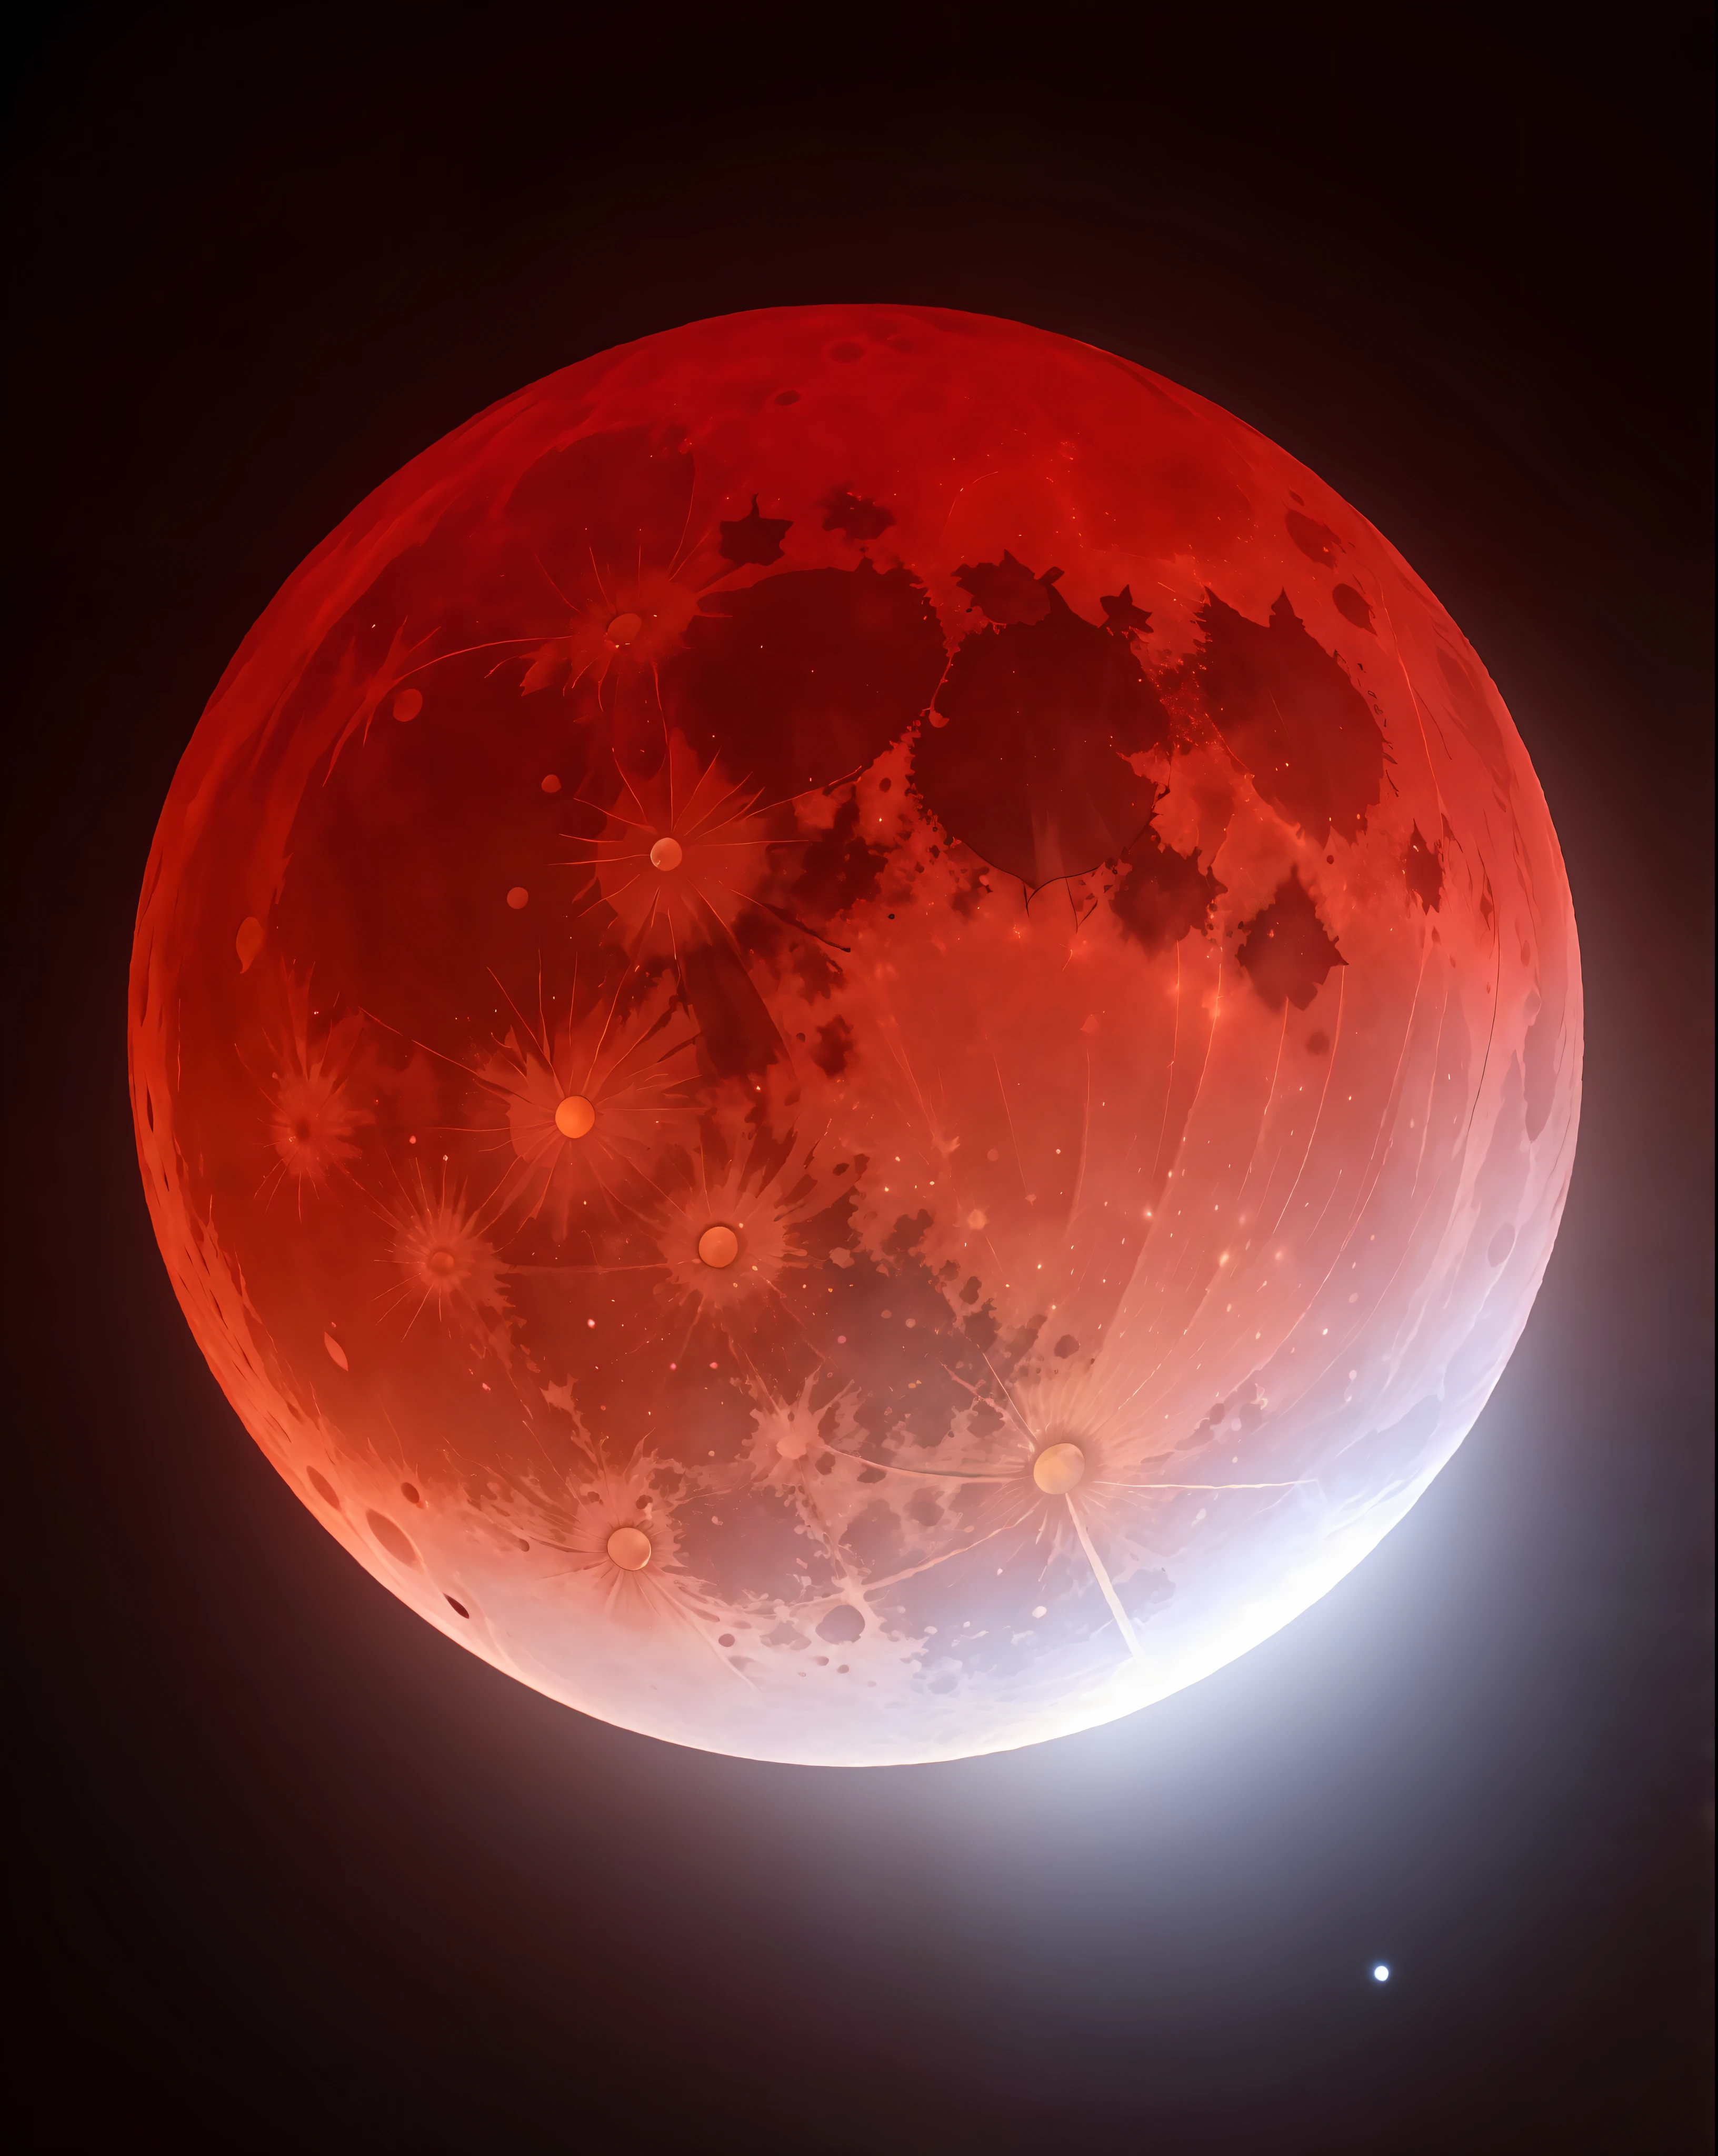 Close-up of red moon with bright lights, Full moon of blood, Blood red moon, Blood Moon, Bloody full moon, Huge red moon, during a blood moon, Blood lunar eclipse, praise the blood moon, full red moon, Red Moon, Blood-red crescent moon, A nuclear explosion of a lunar eclipse, Red lunar eclipse, blood moon background